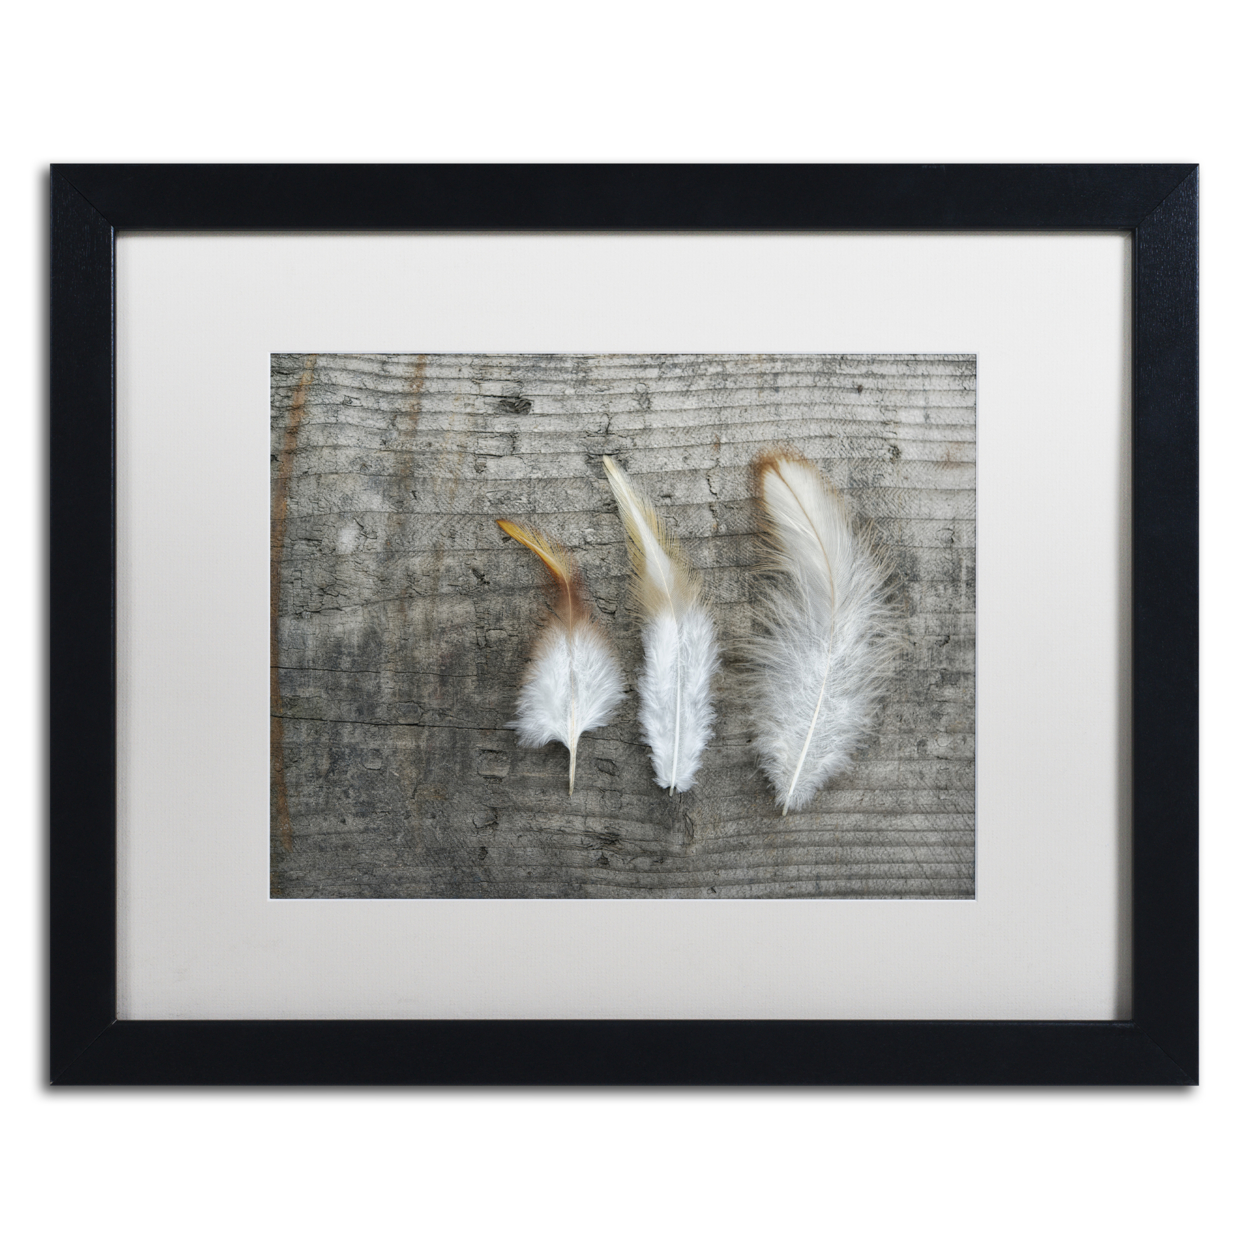 Cora Niele 'Three Feathers On Wood' Black Wooden Framed Art 18 X 22 Inches